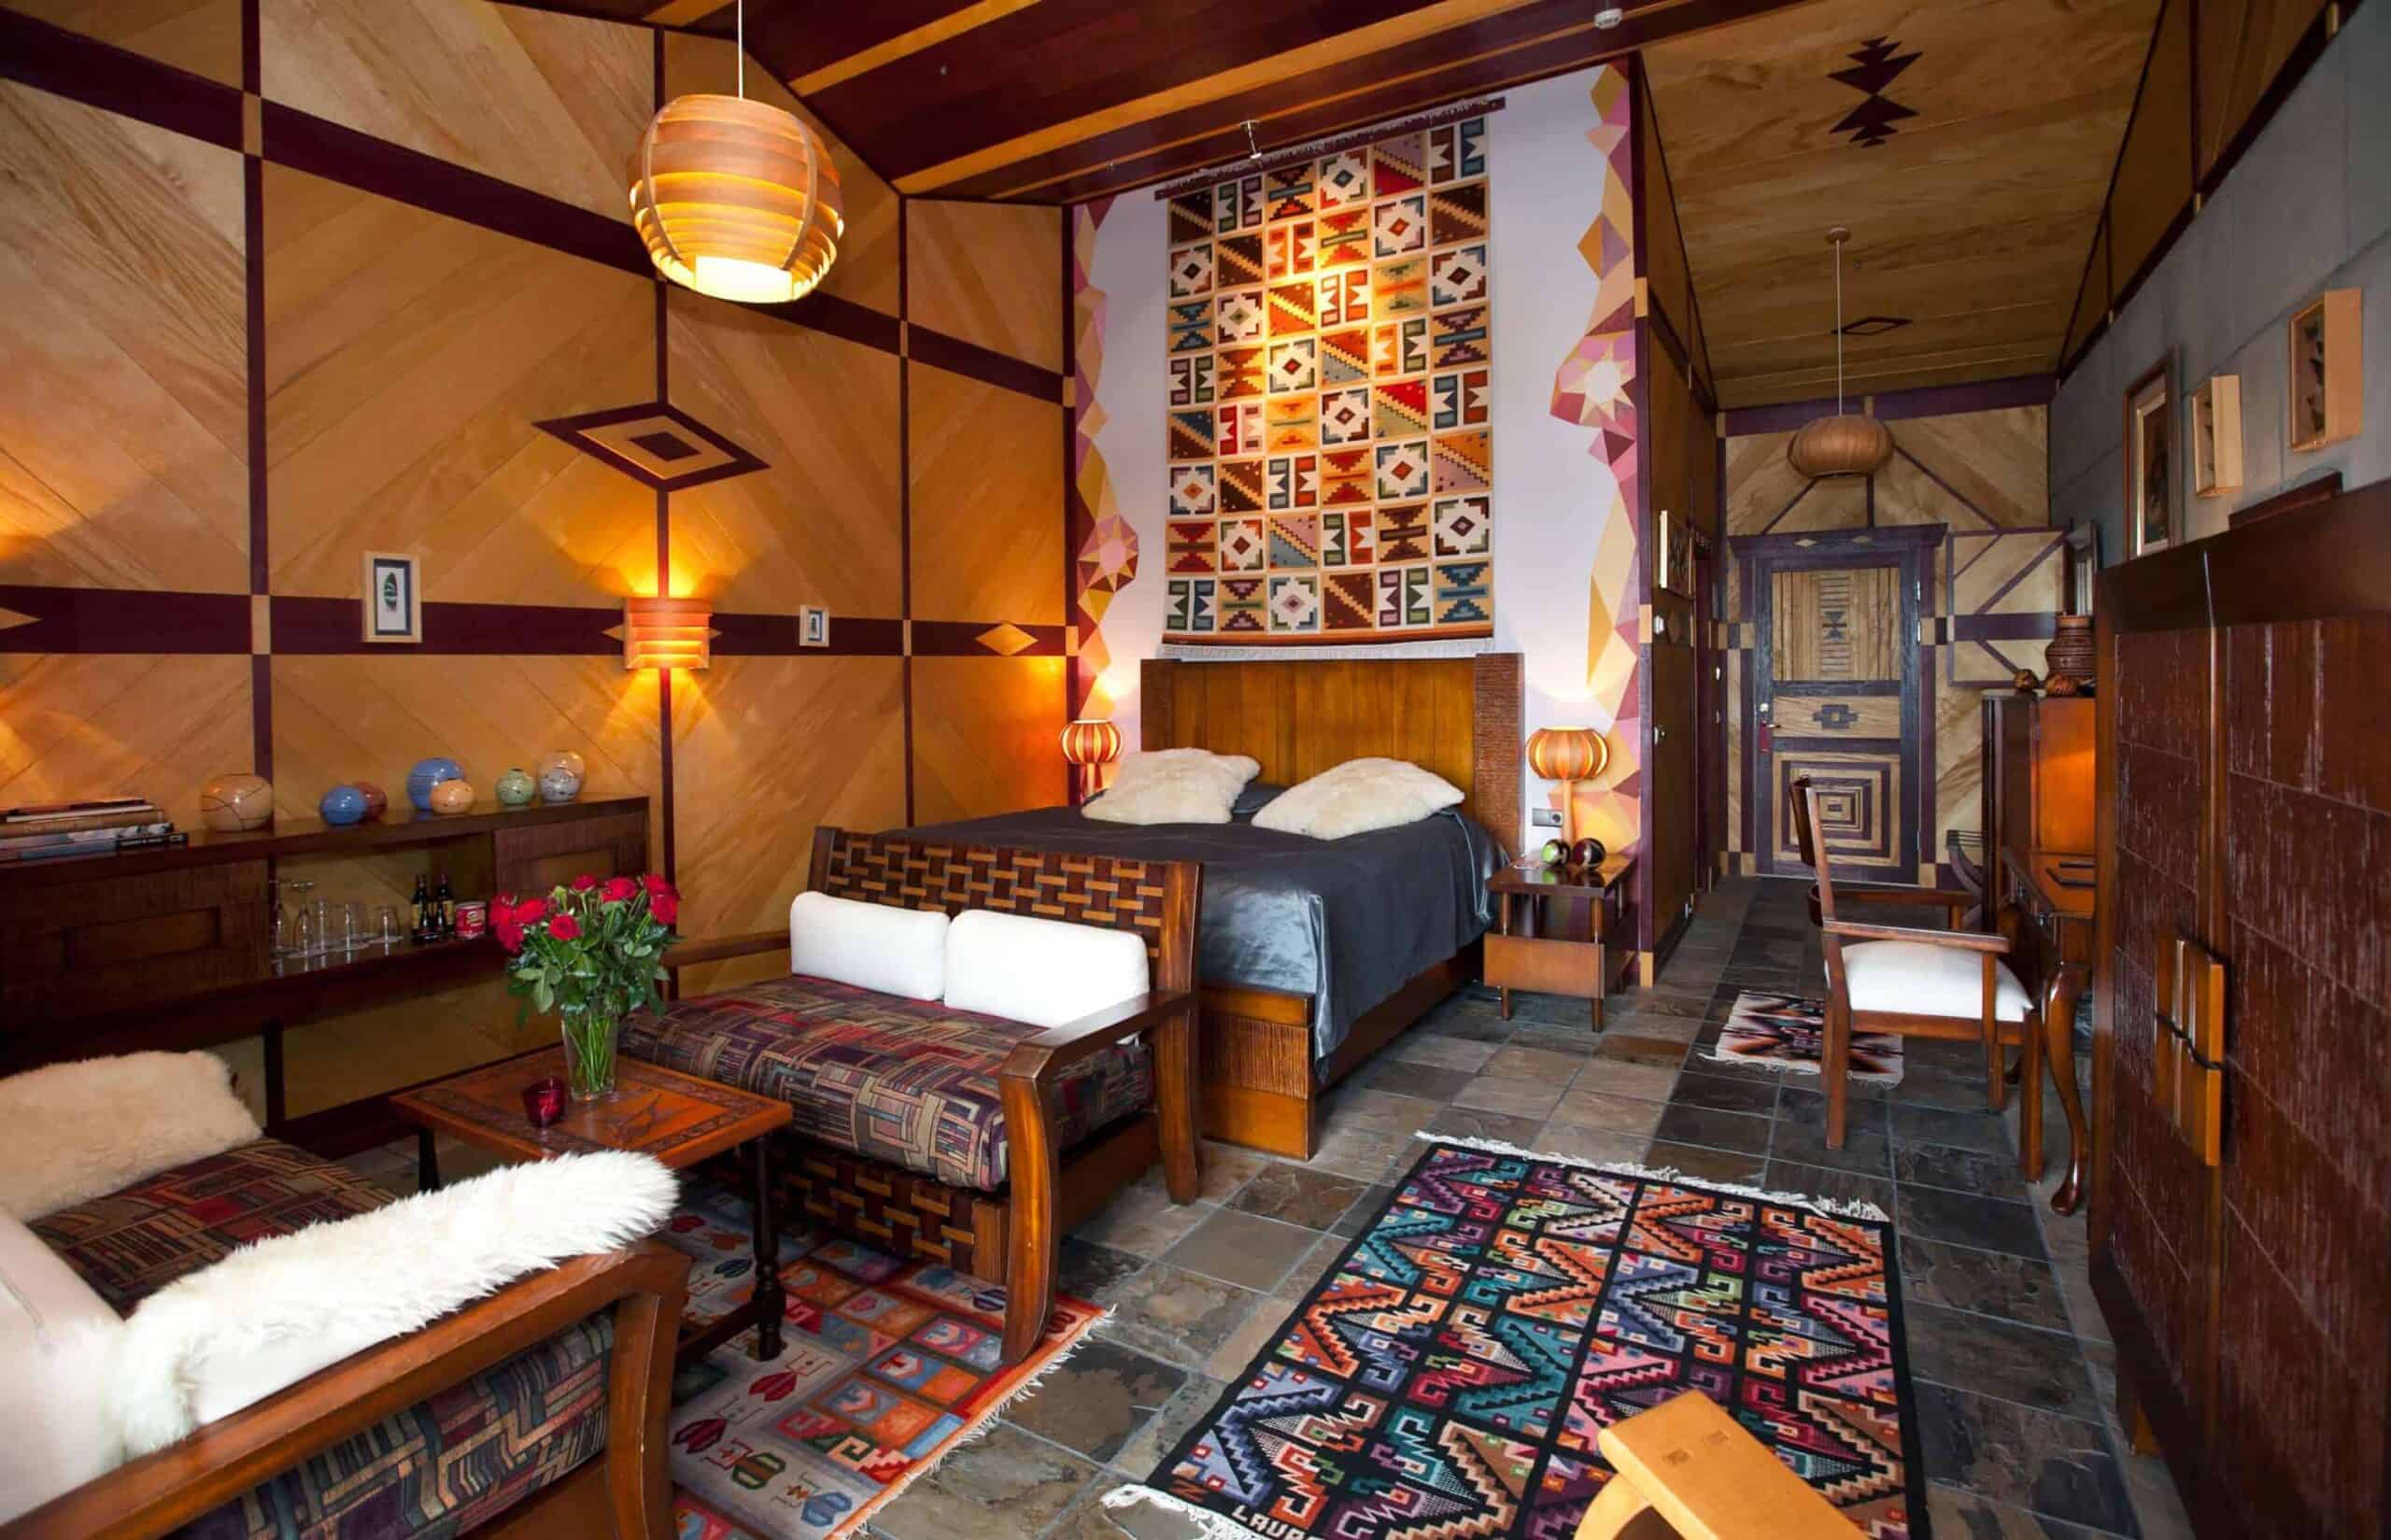 Hotel Rangá's South America suite decorated with colorful tapestries, wooden accents and authentic artwork.